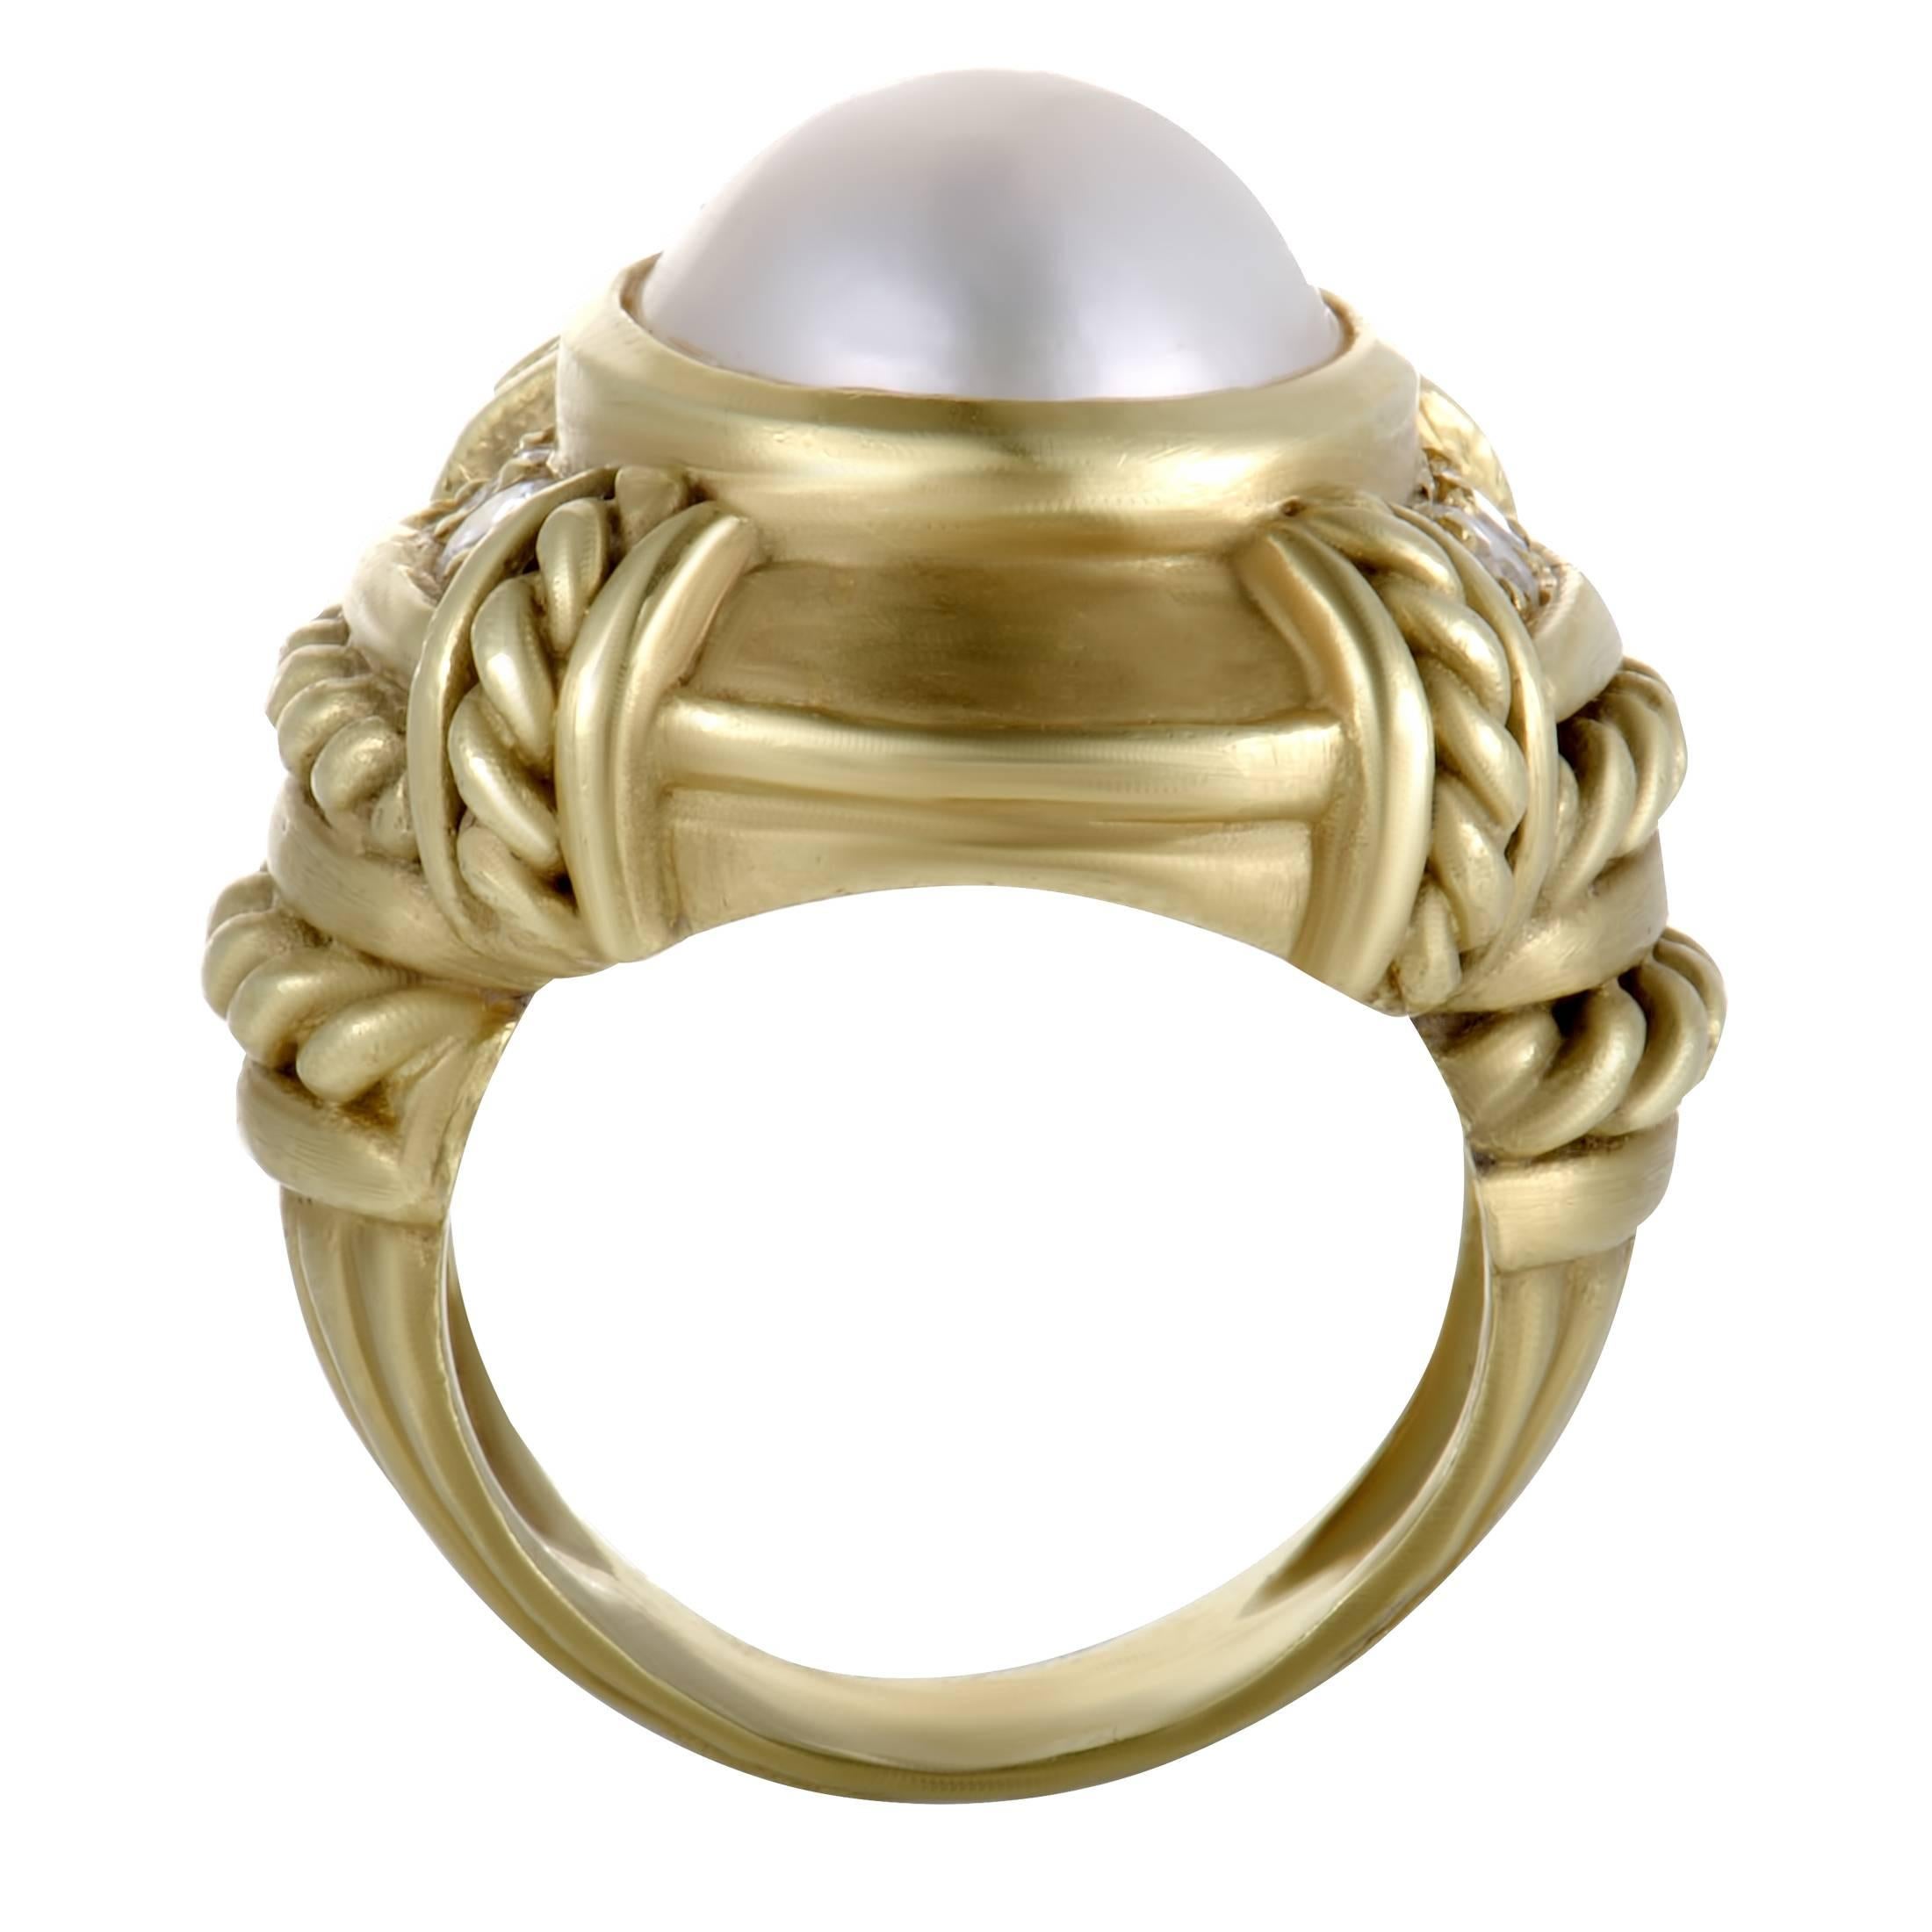 Nifty woven segments give an attractive aesthetic twist to this statement piece designed by Judith Ripka. The ring is made of 18K yellow gold and decorated with a sublime mabe pearl and 0.35 carats of glistening diamonds.
Ring Size: 6
Band